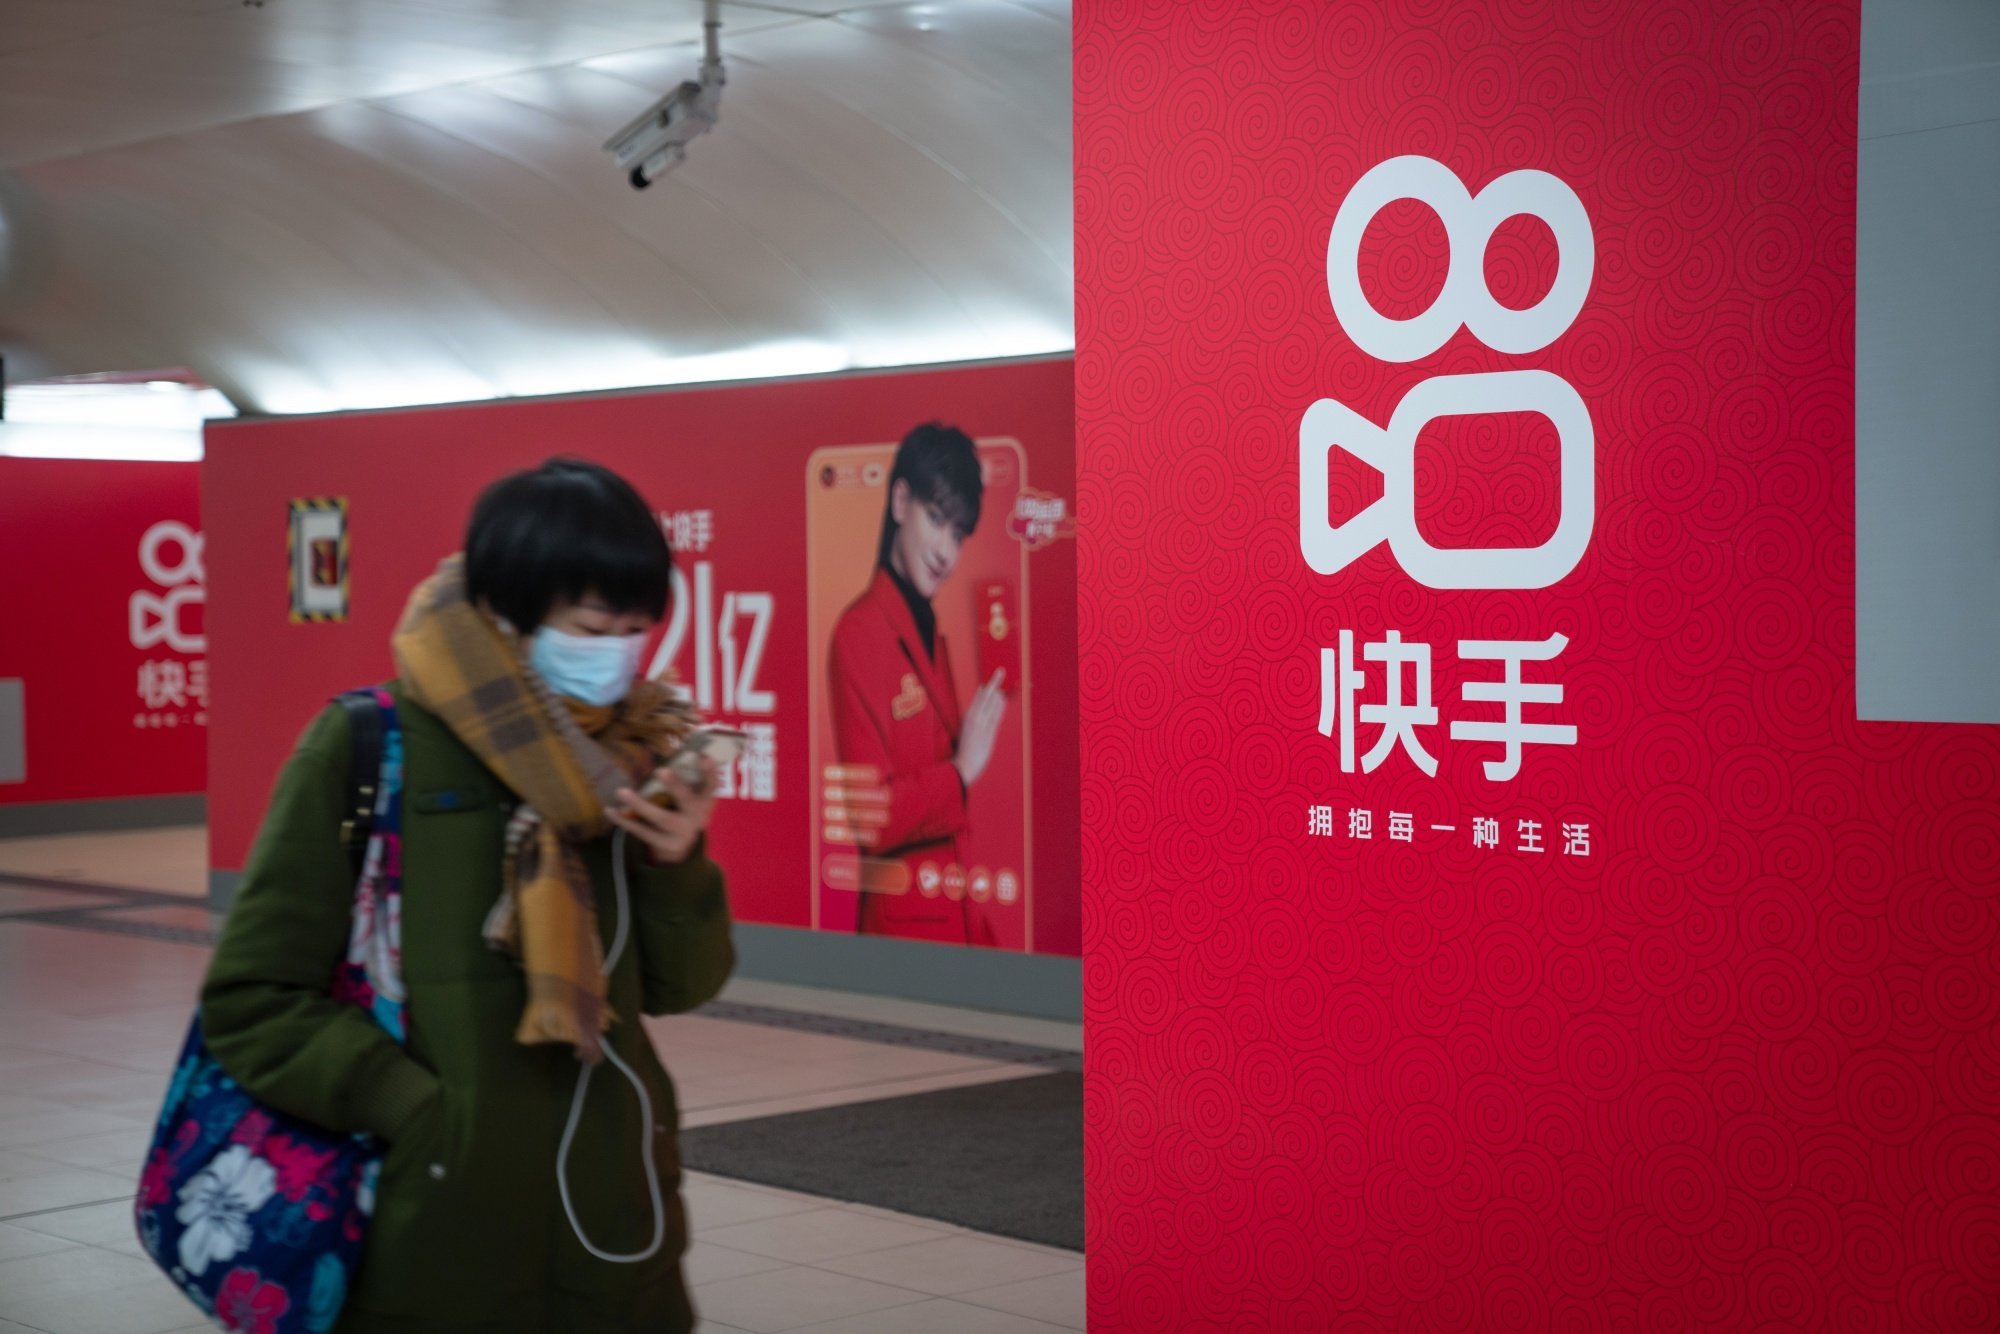 A passenger walks past a Kuaishou ad in a subway station in Beijing, February 3, 2021. Photo: Bloomberg